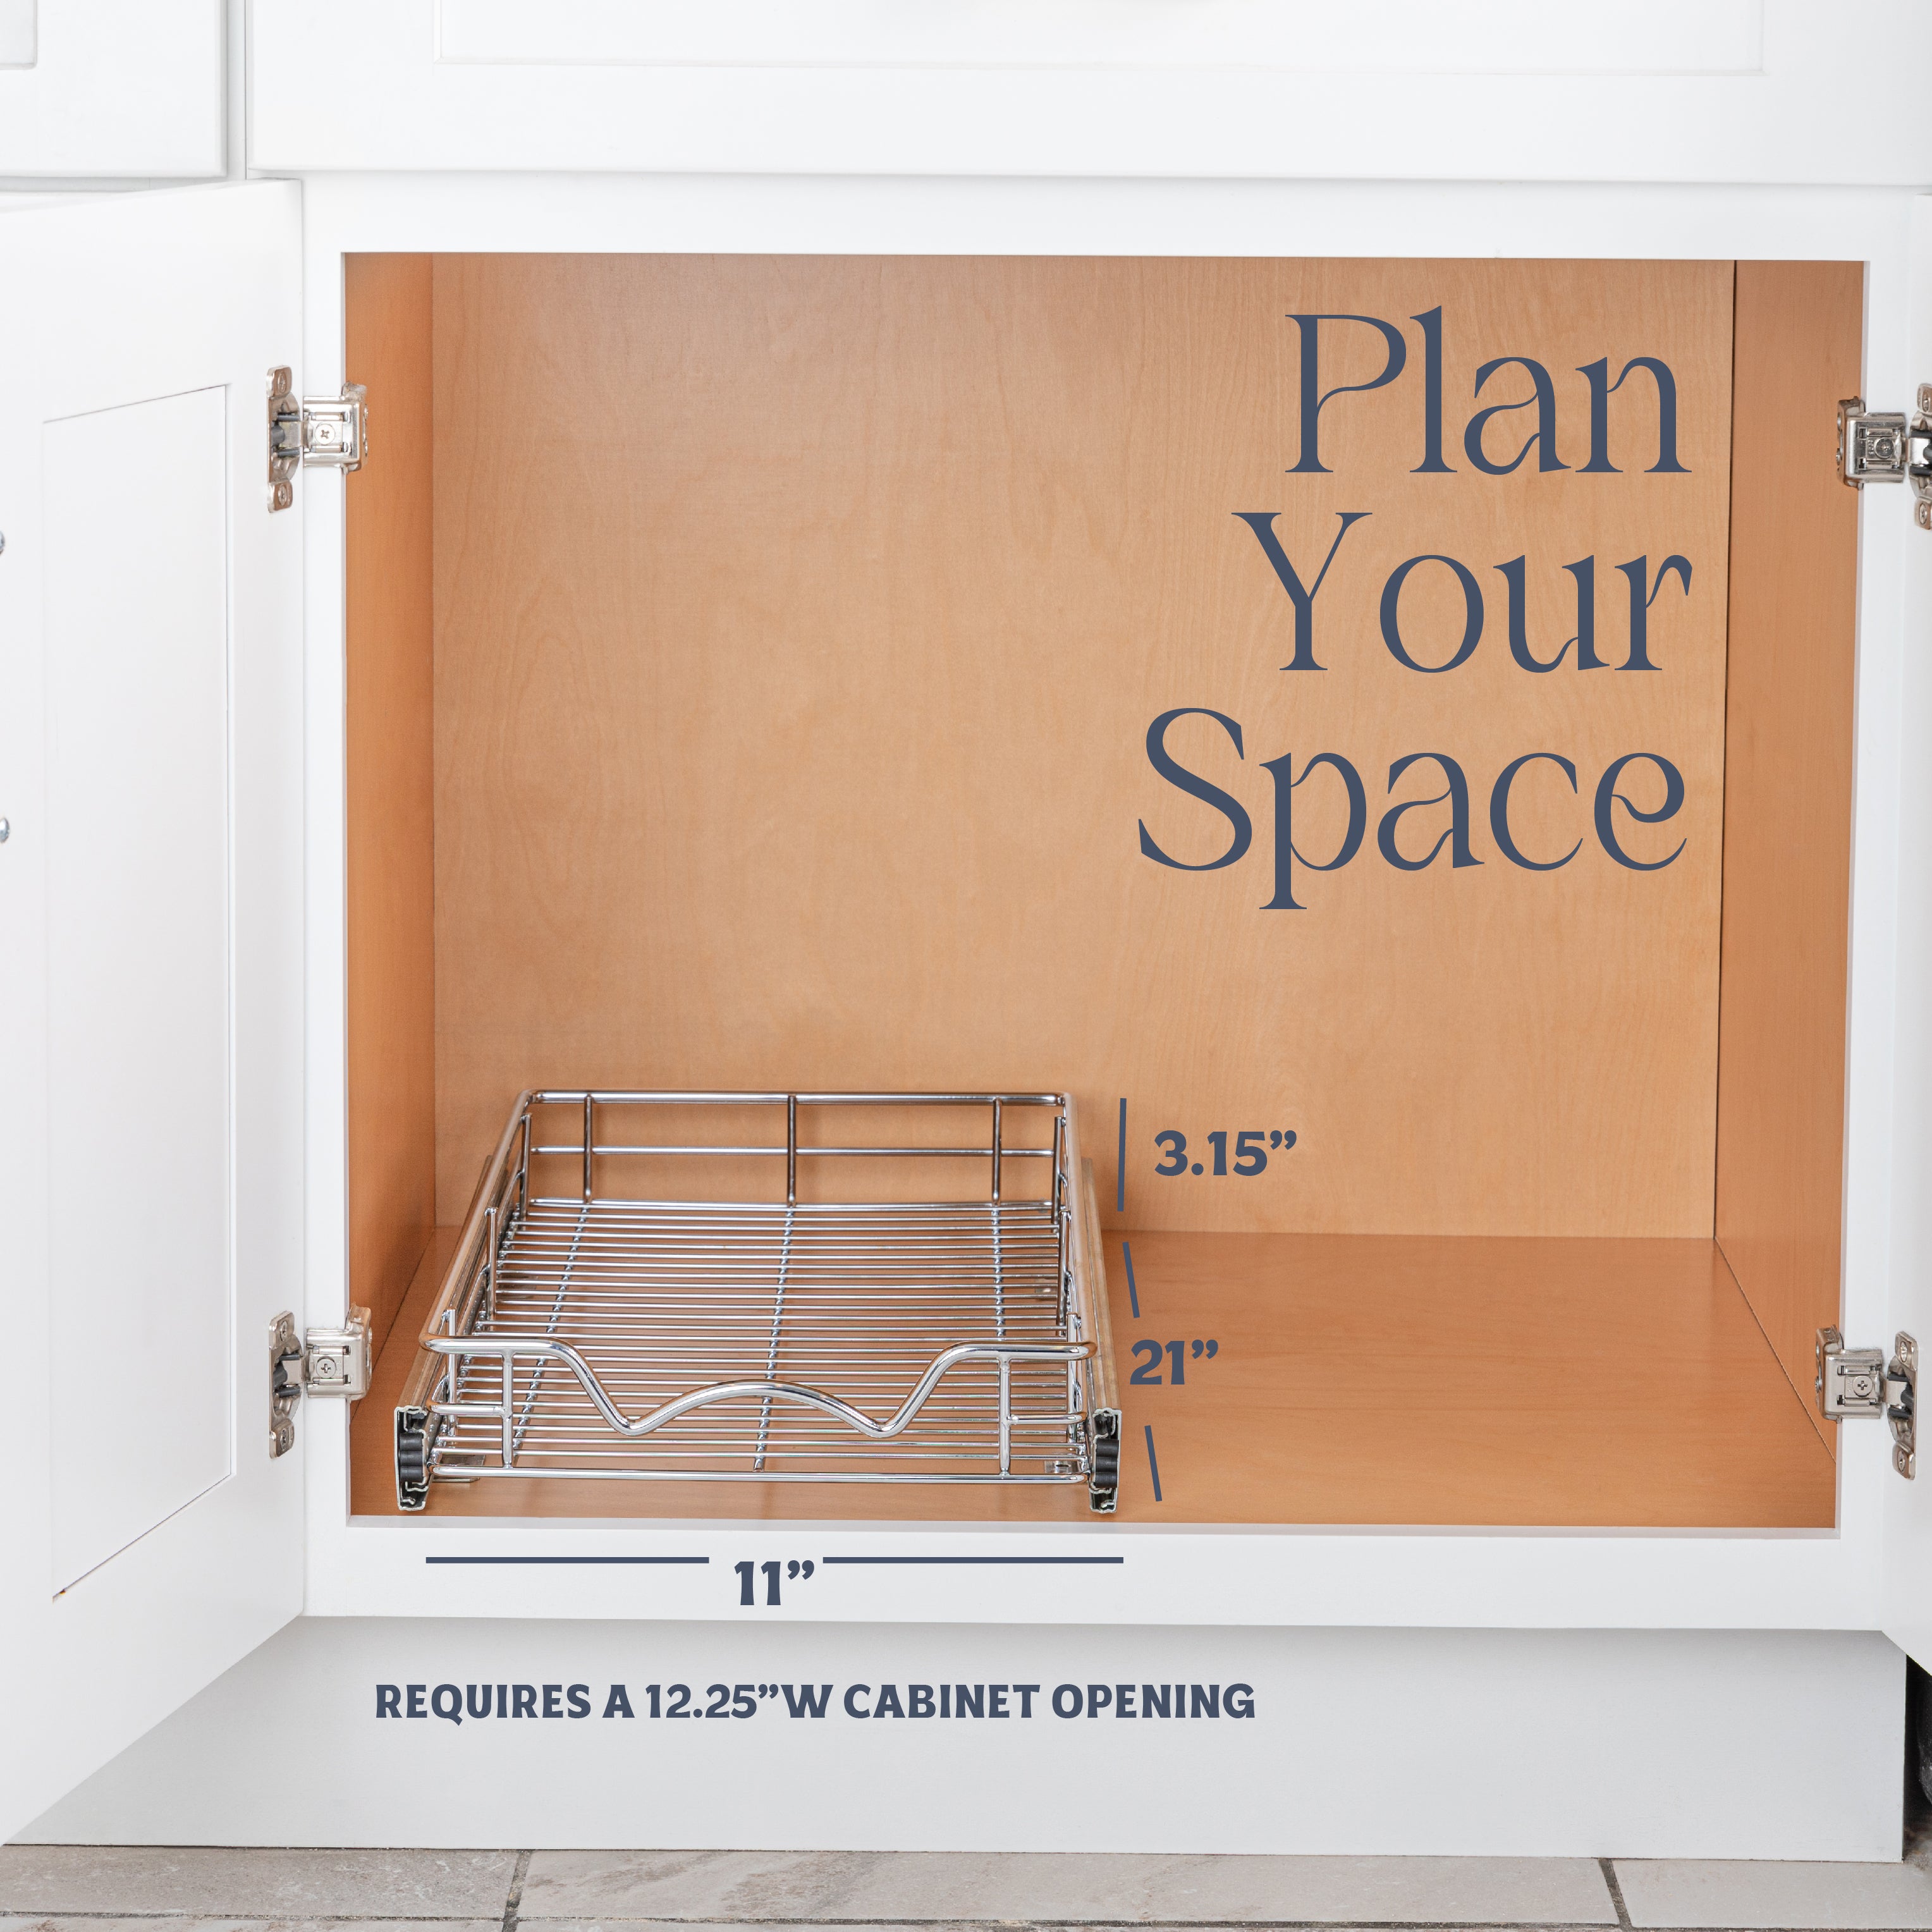 21" Pull Out Cabinet Drawer Organizer, Heavy Duty-with 5 Year Limited Warranty, Chrome Finish